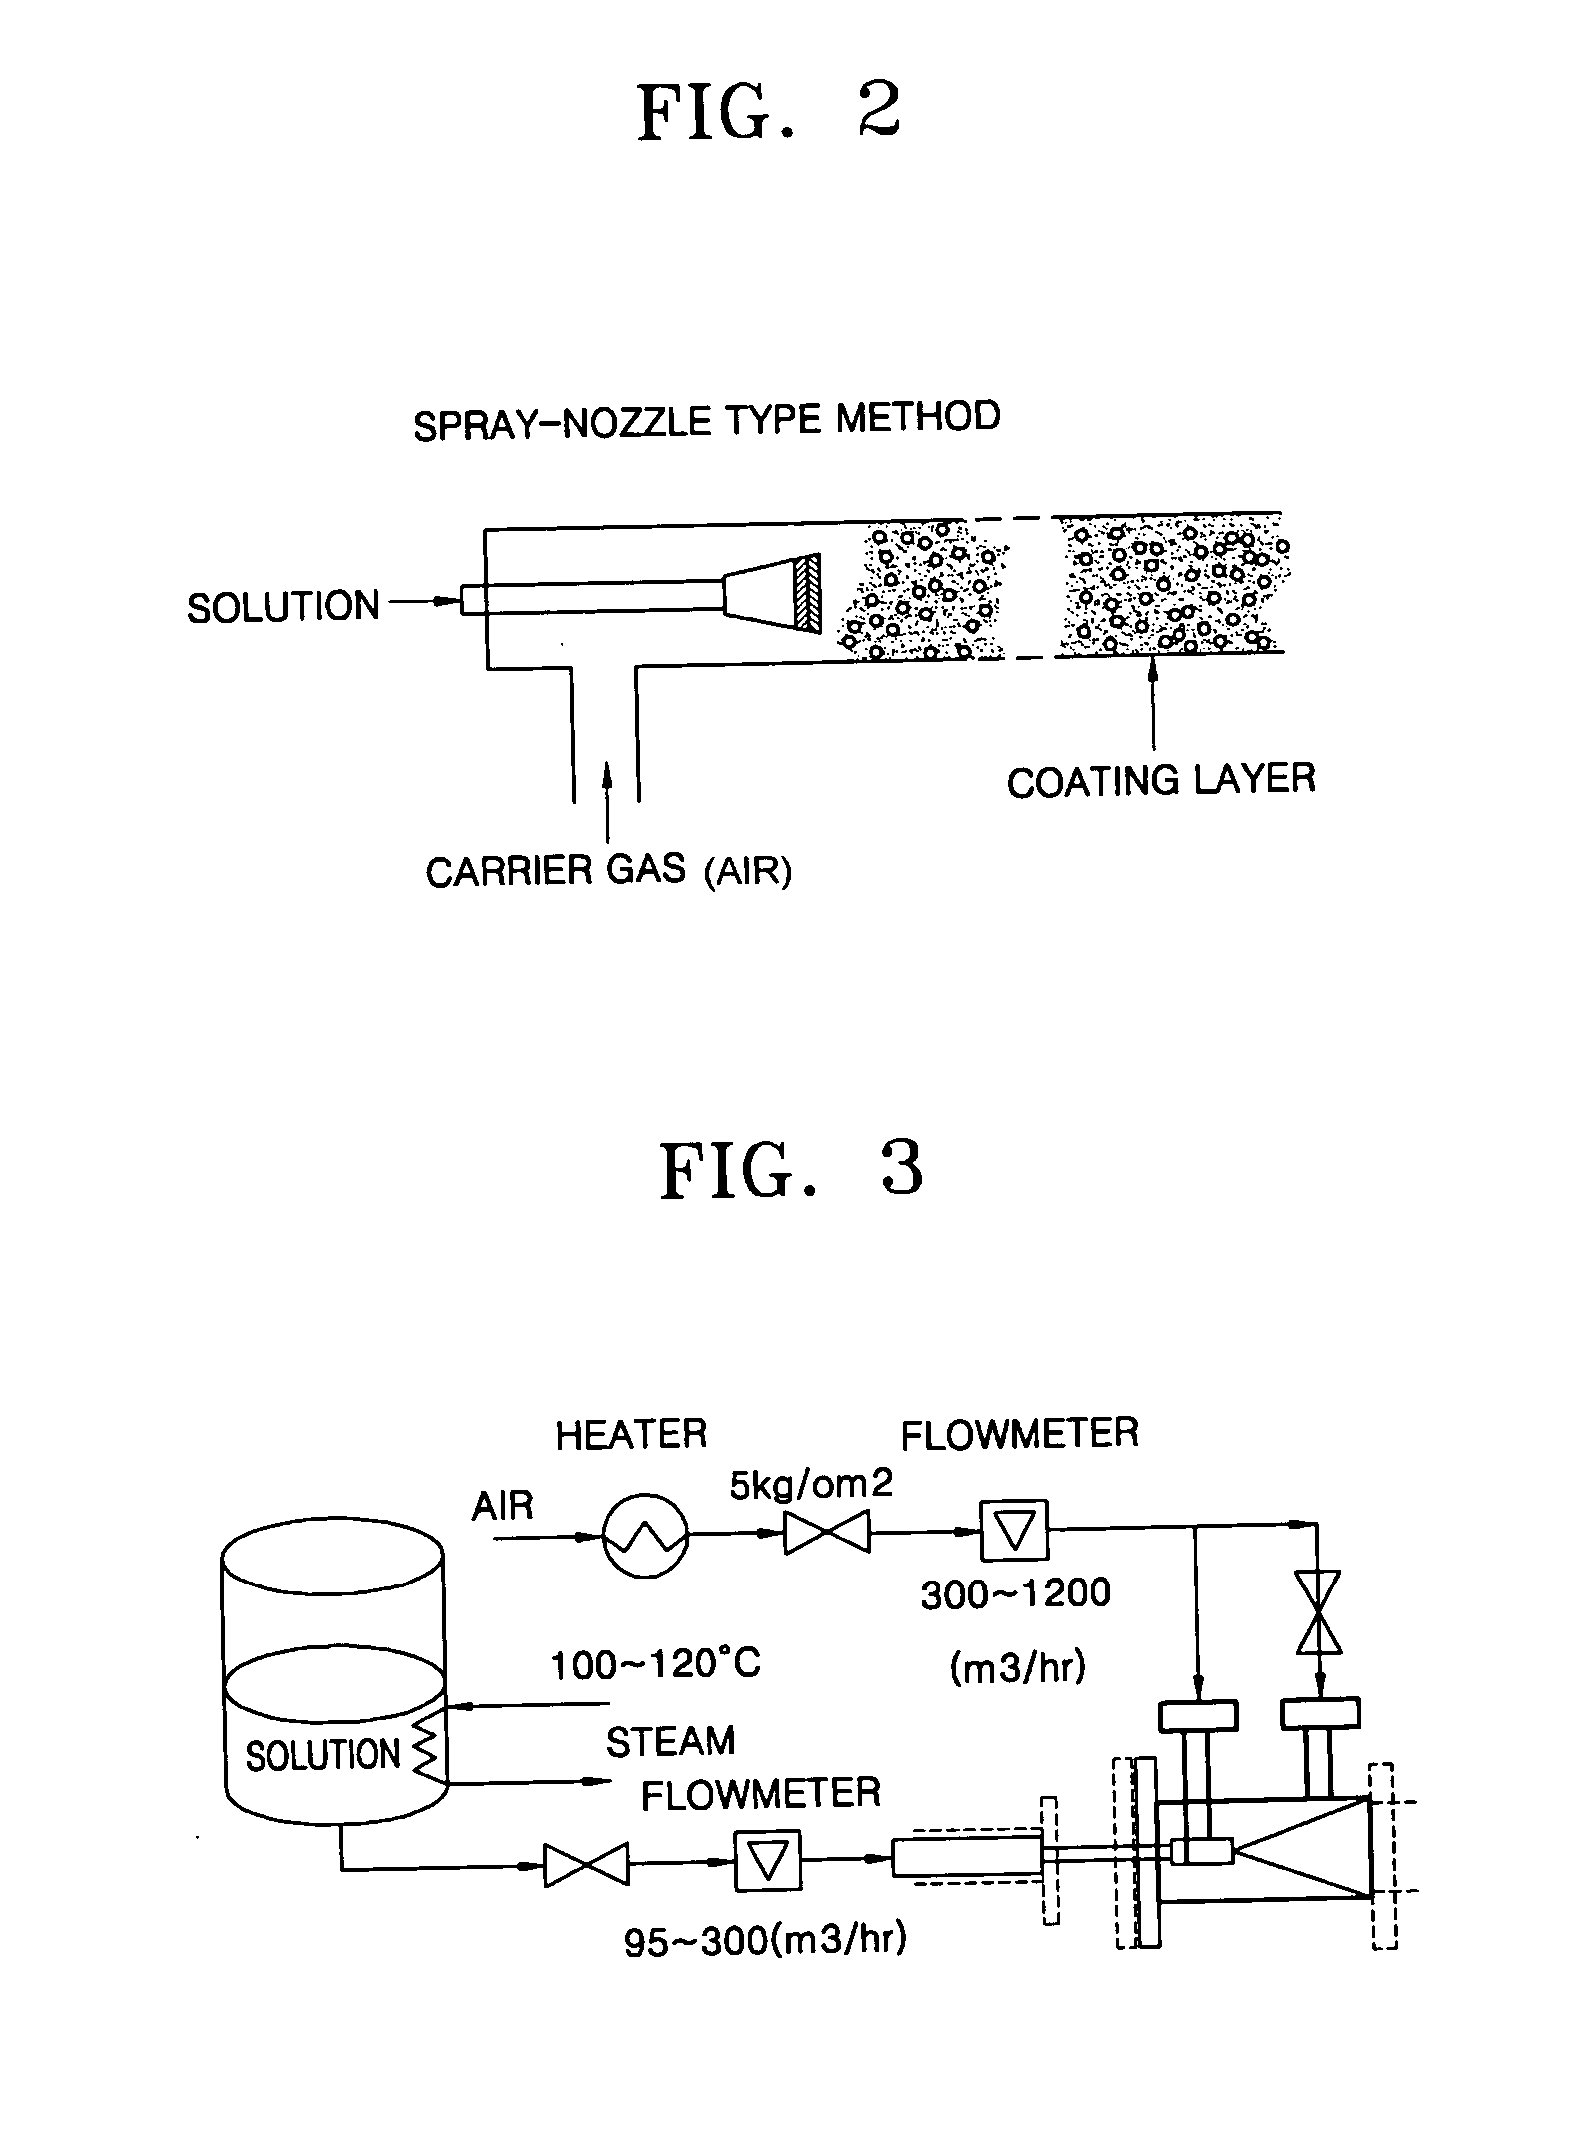 Coating film for inhibiting coke formation in ethylene dichloride pyrolysis cracker and method of producing the same